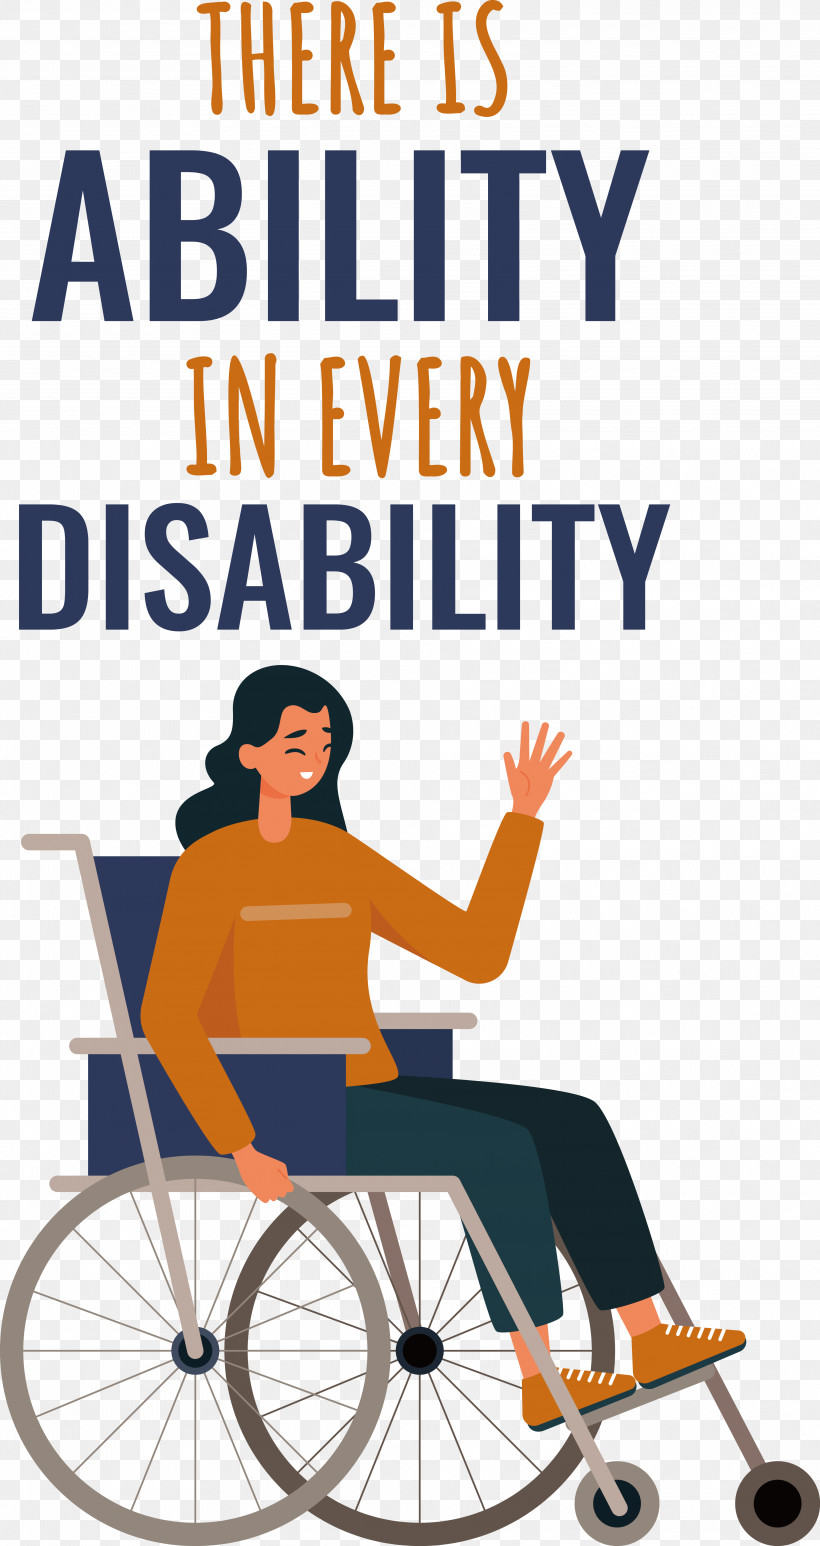 International Disability Day Never Give Up International Day Disabled Persons, PNG, 3846x7255px, International Disability Day, Disabled Persons, International Day, Never Give Up Download Free